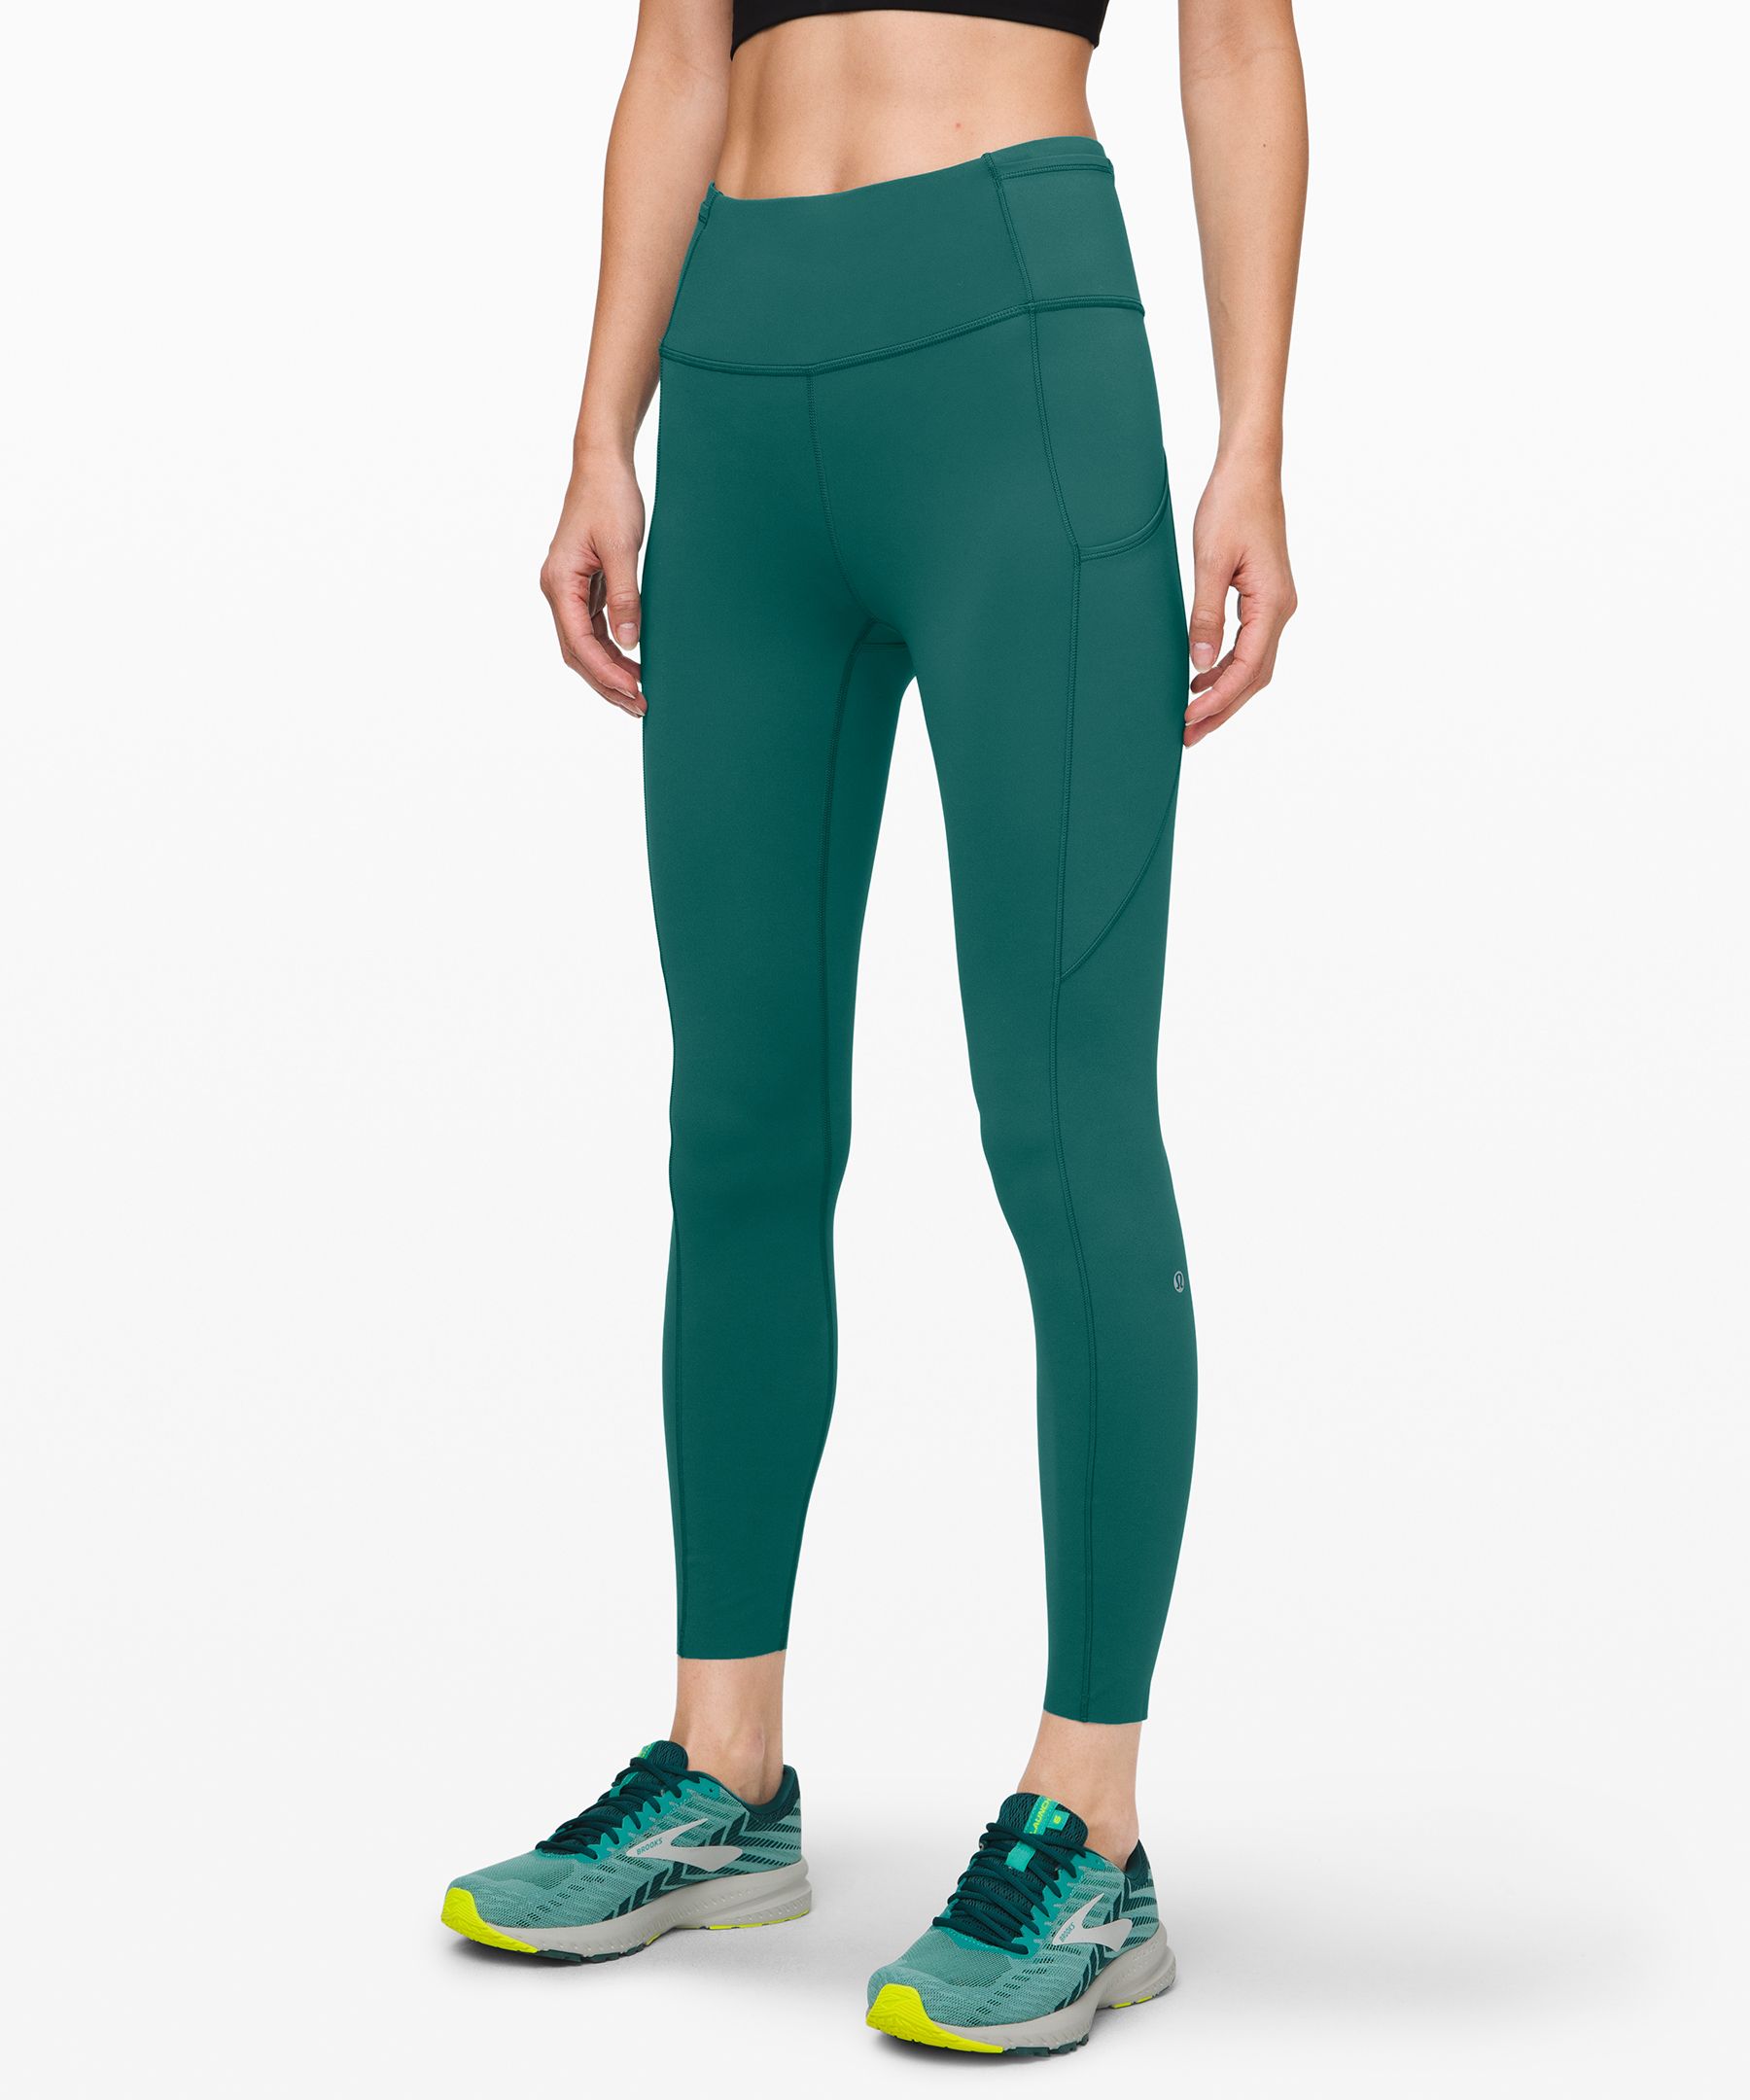 Lululemon Fast And Free Tight Ii 25 *non-reflective Nulux In Melanite